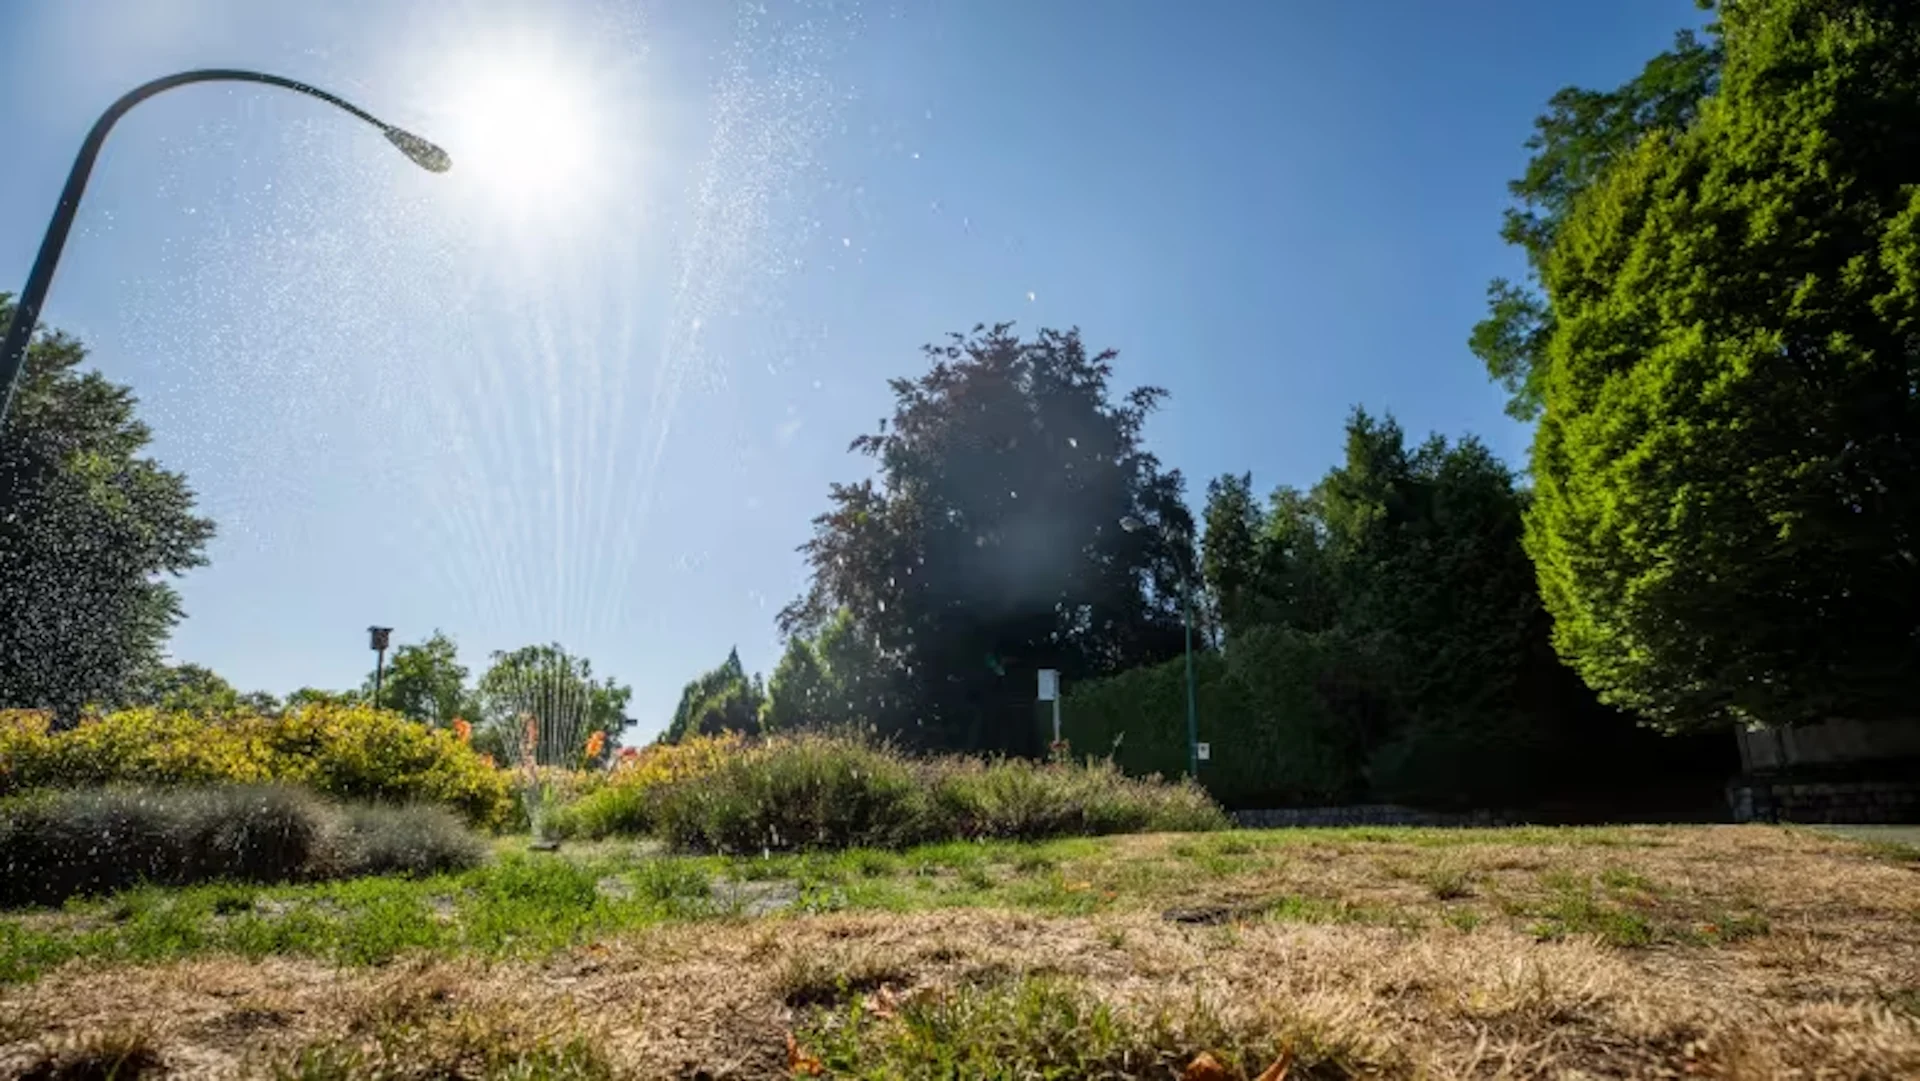 Lawn watering restrictions for Metro Vancouver set to run until mid-October